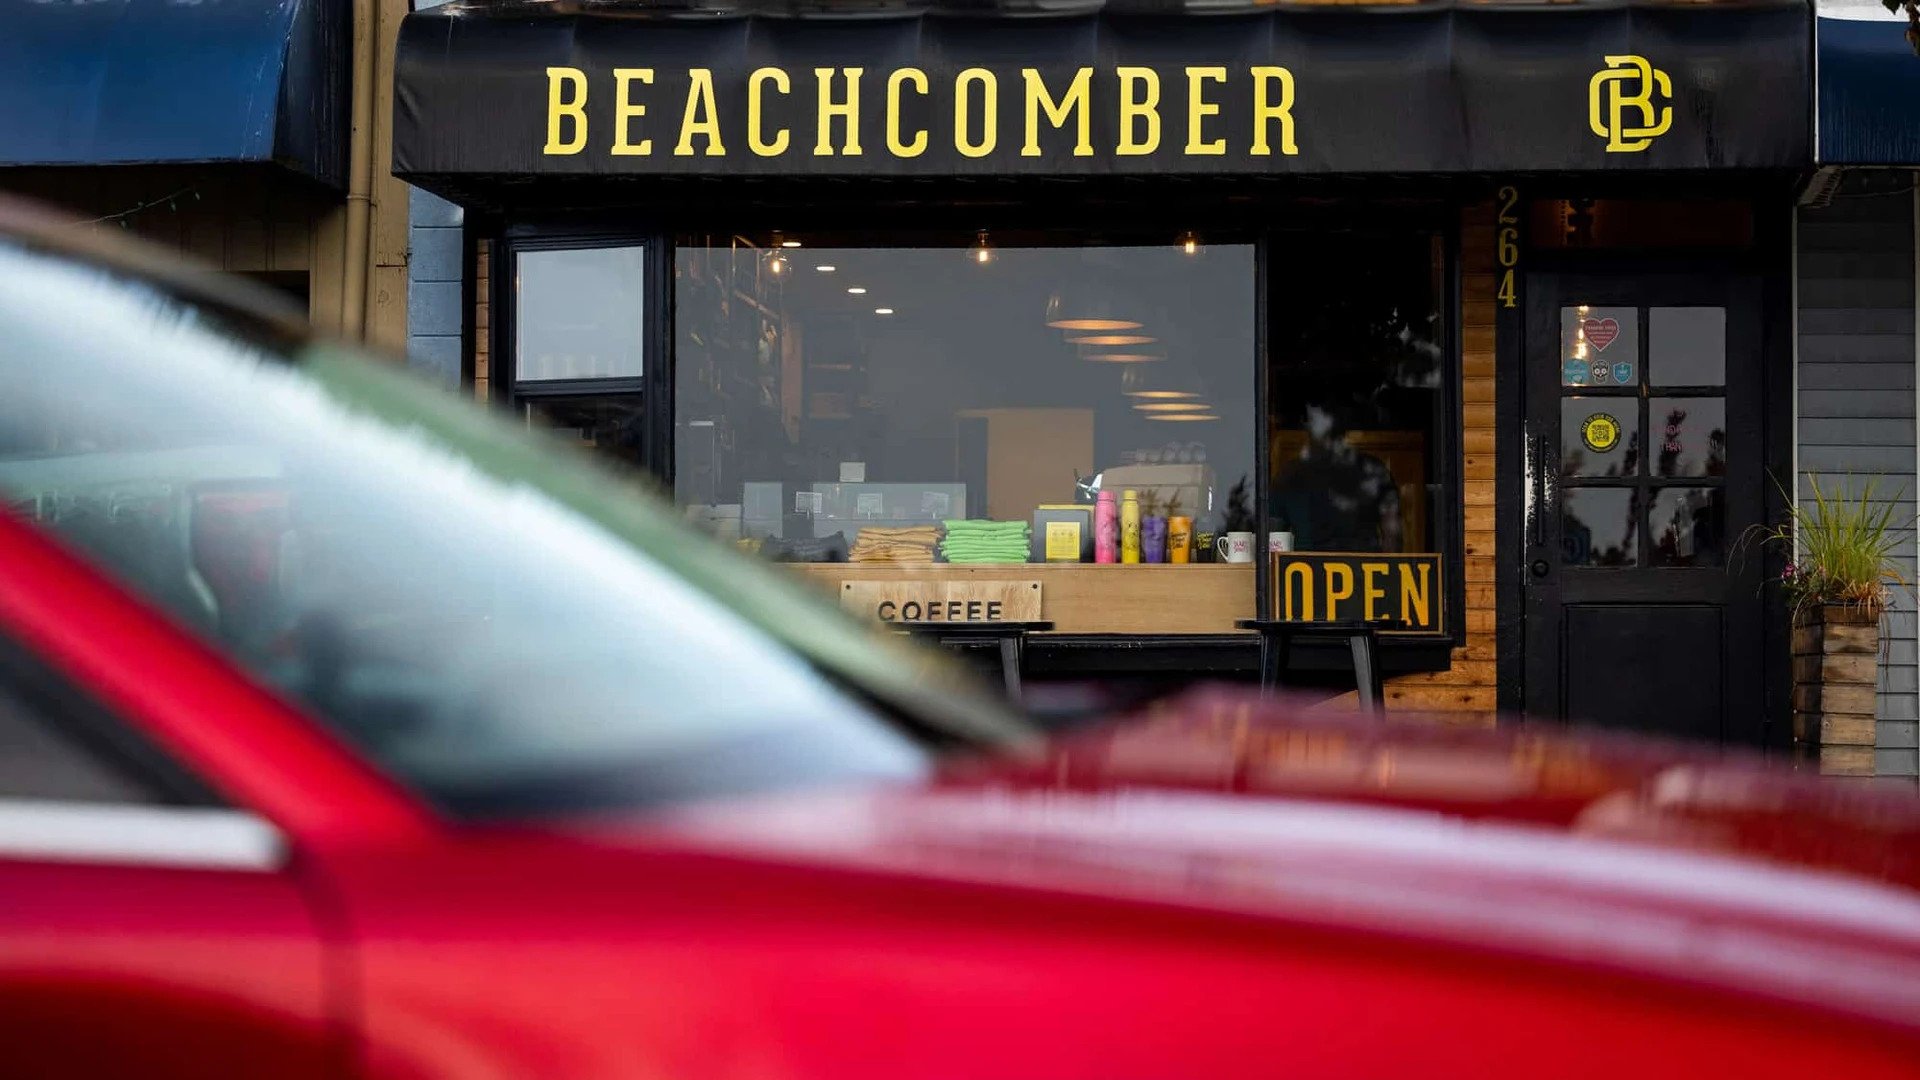 Beachcomber Coffee Shop at Gibsons for Mazda by Callum Snape